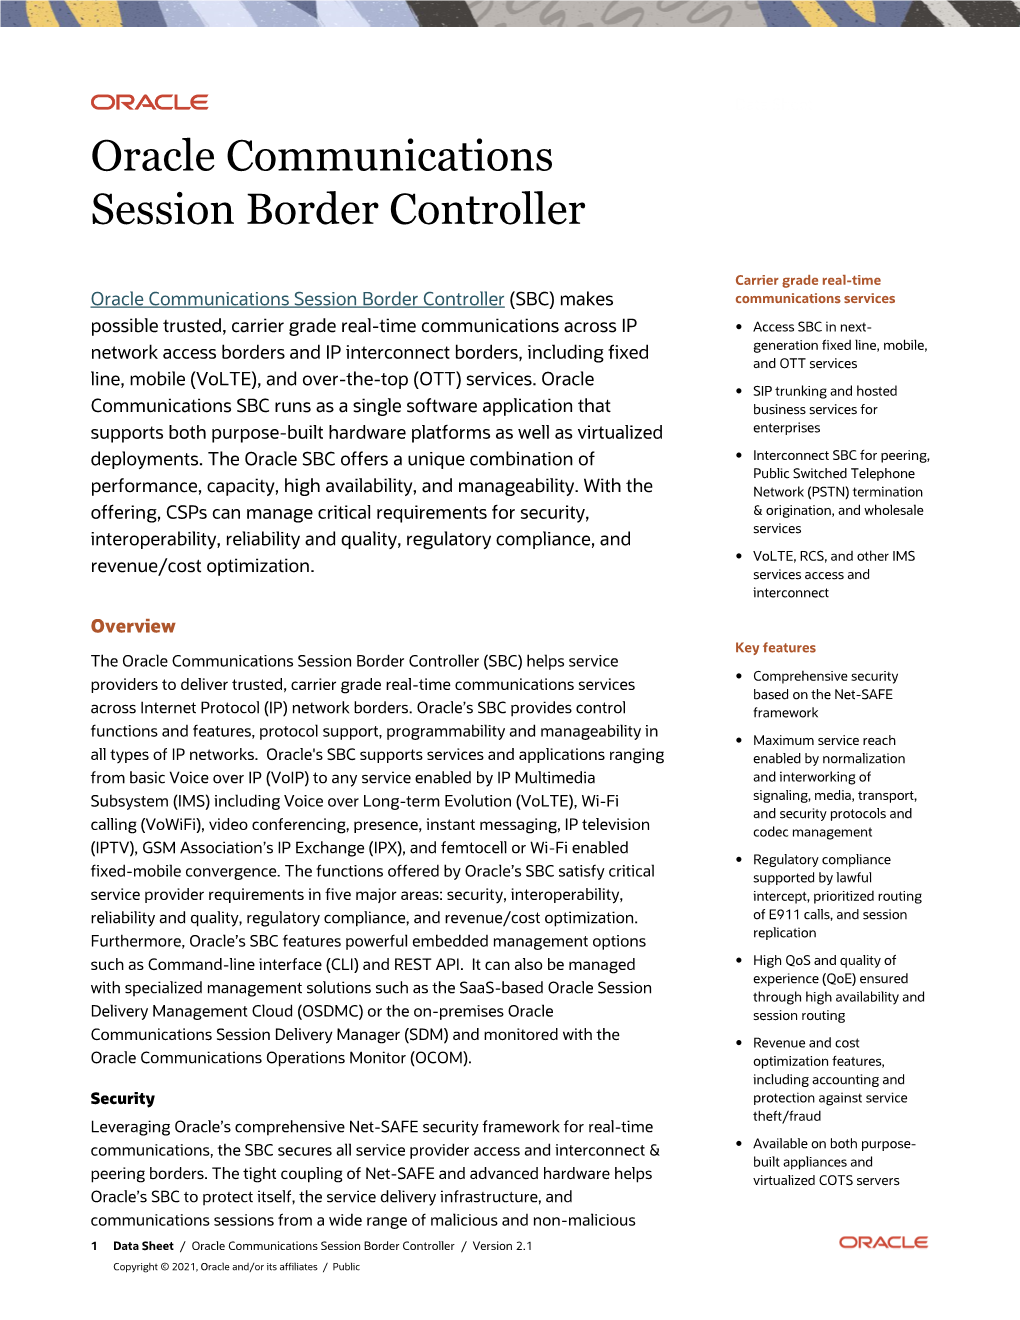 Oracle Communications Session Border Controller